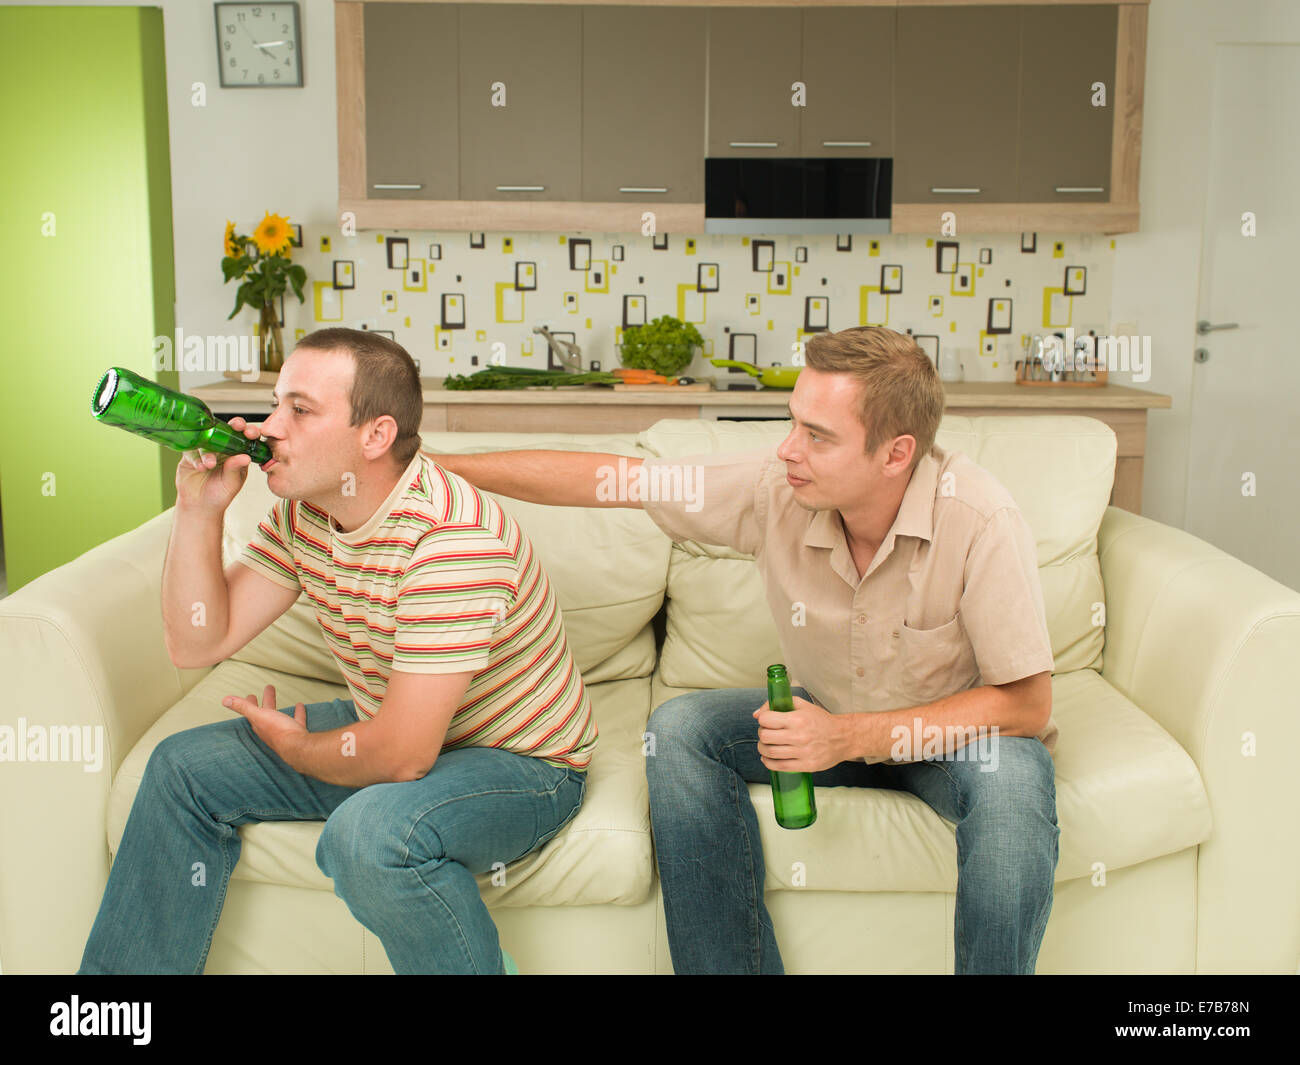 two young caucasian men sitting on couch, holding beer bottles, consolation Stock Photo